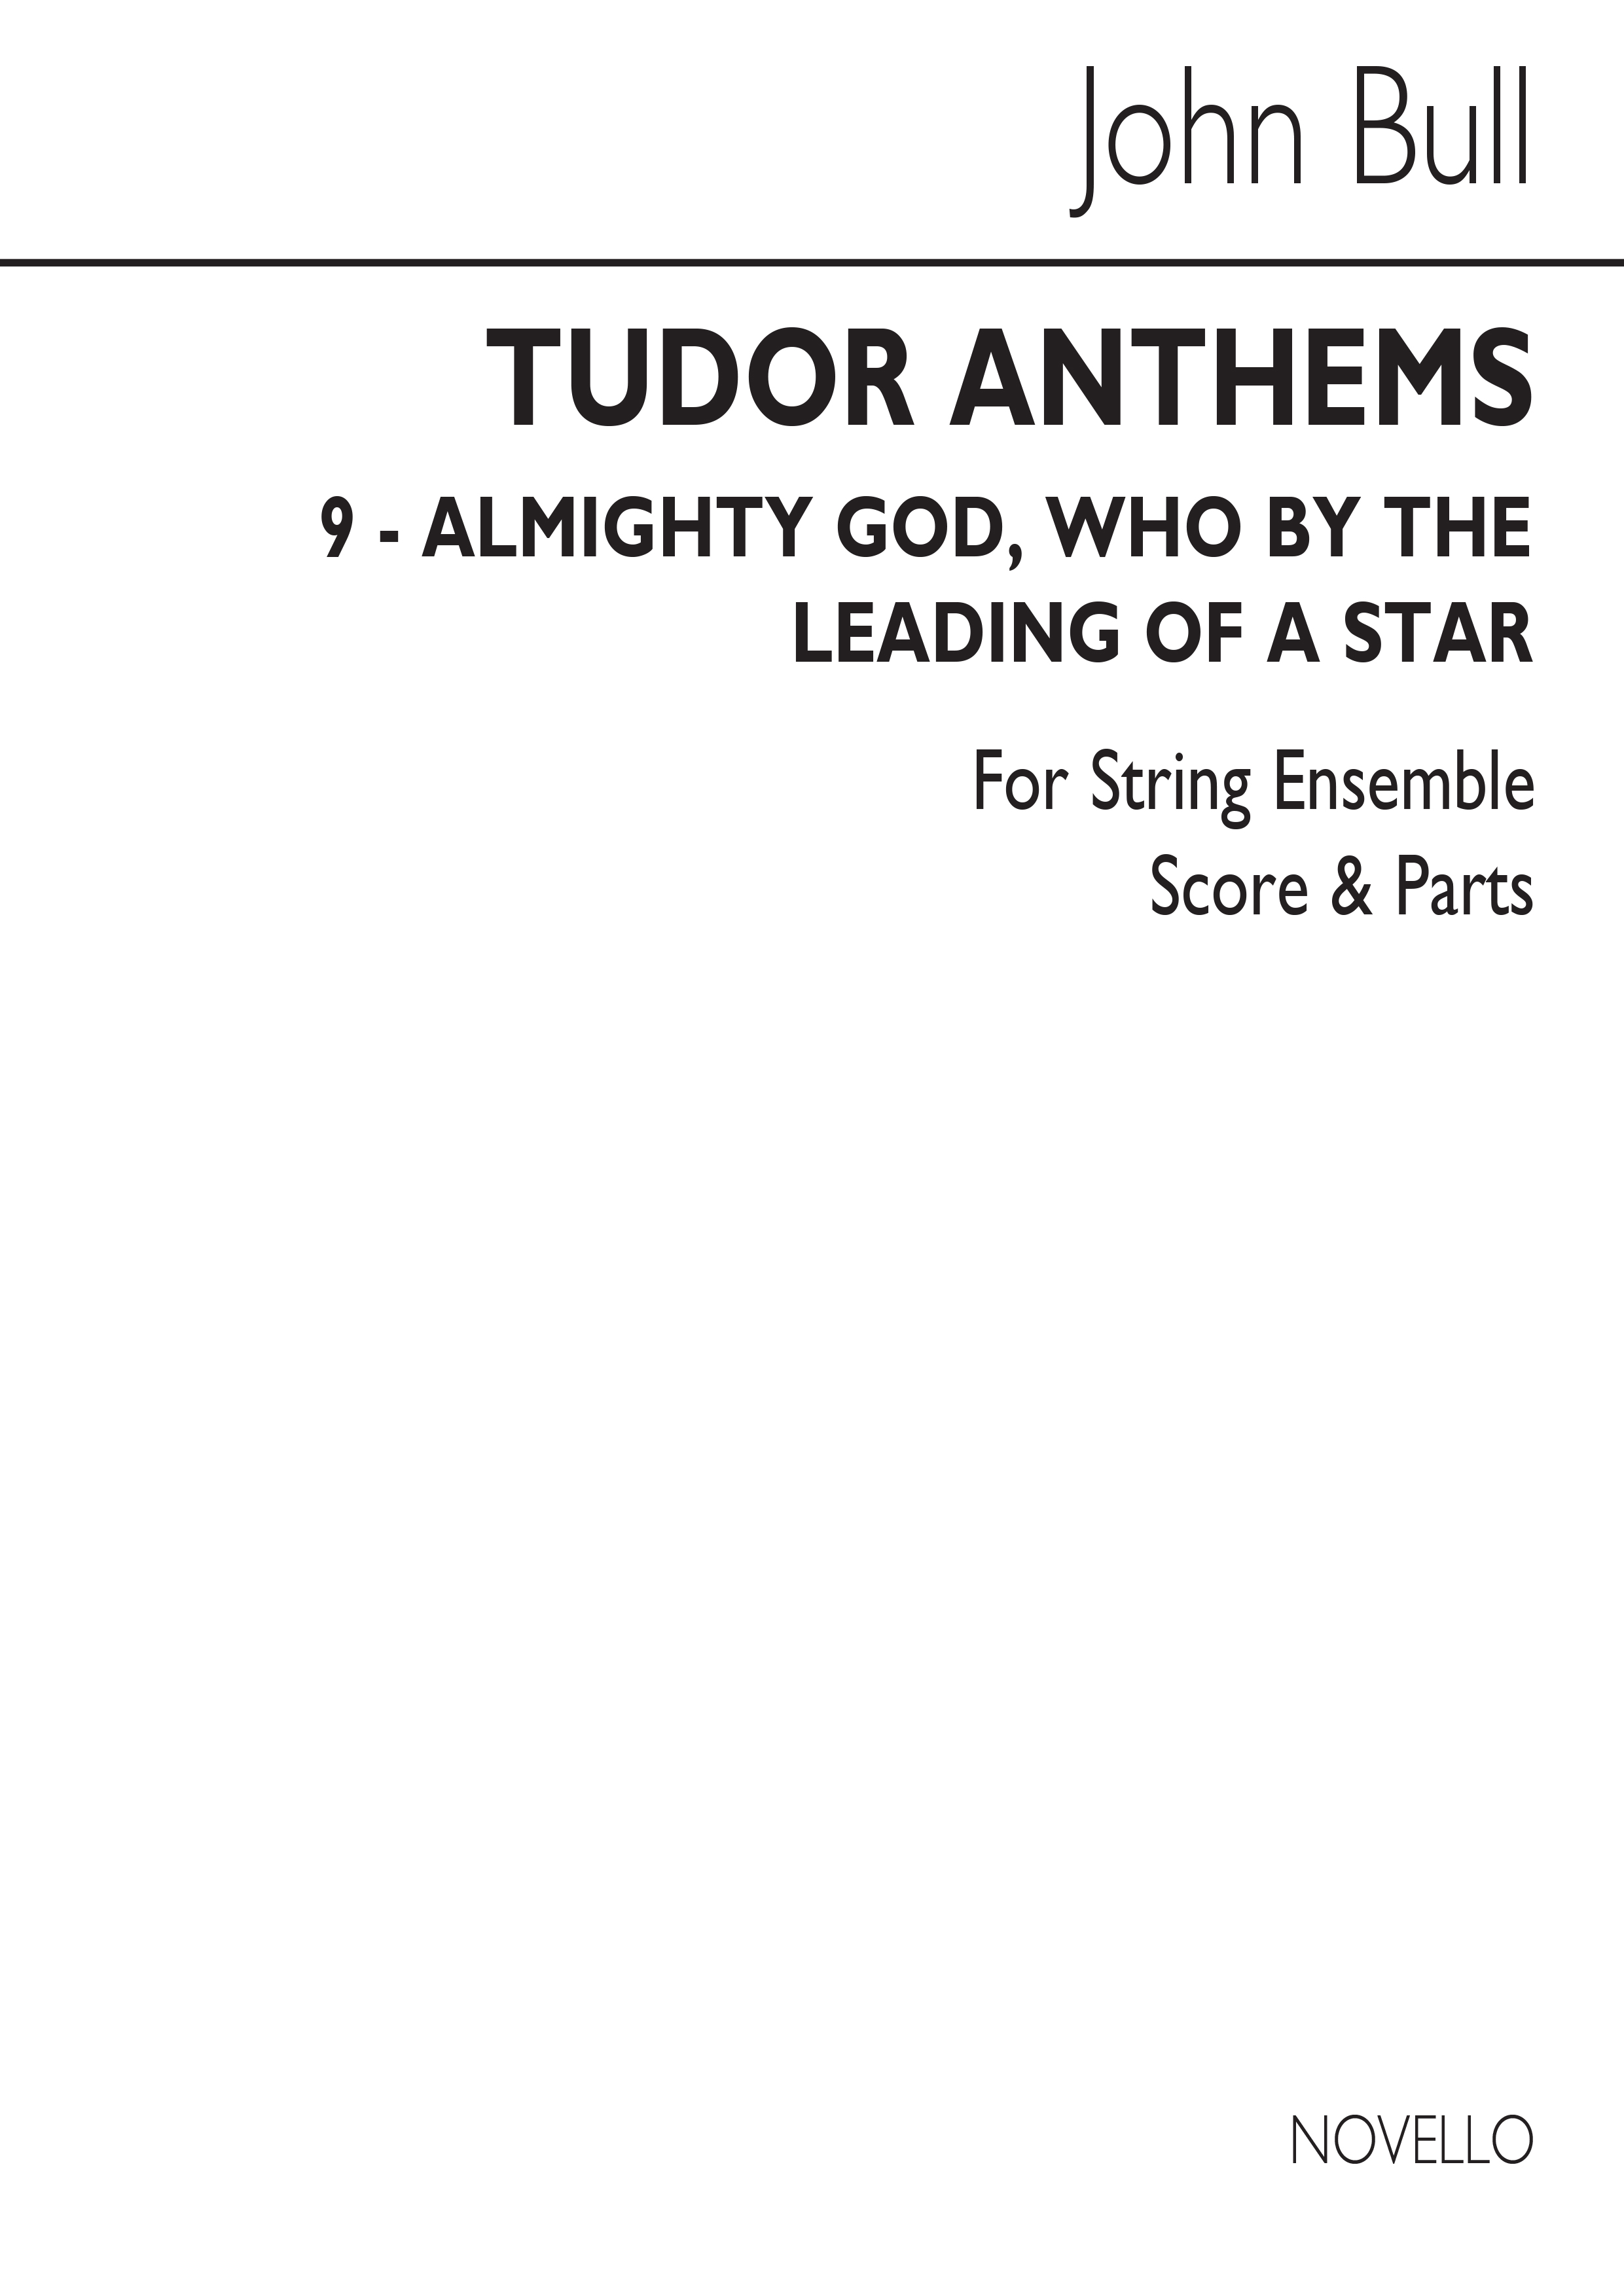 John Bull: Almighty God Who By The Leading Of A Star: String Ensemble: Score and